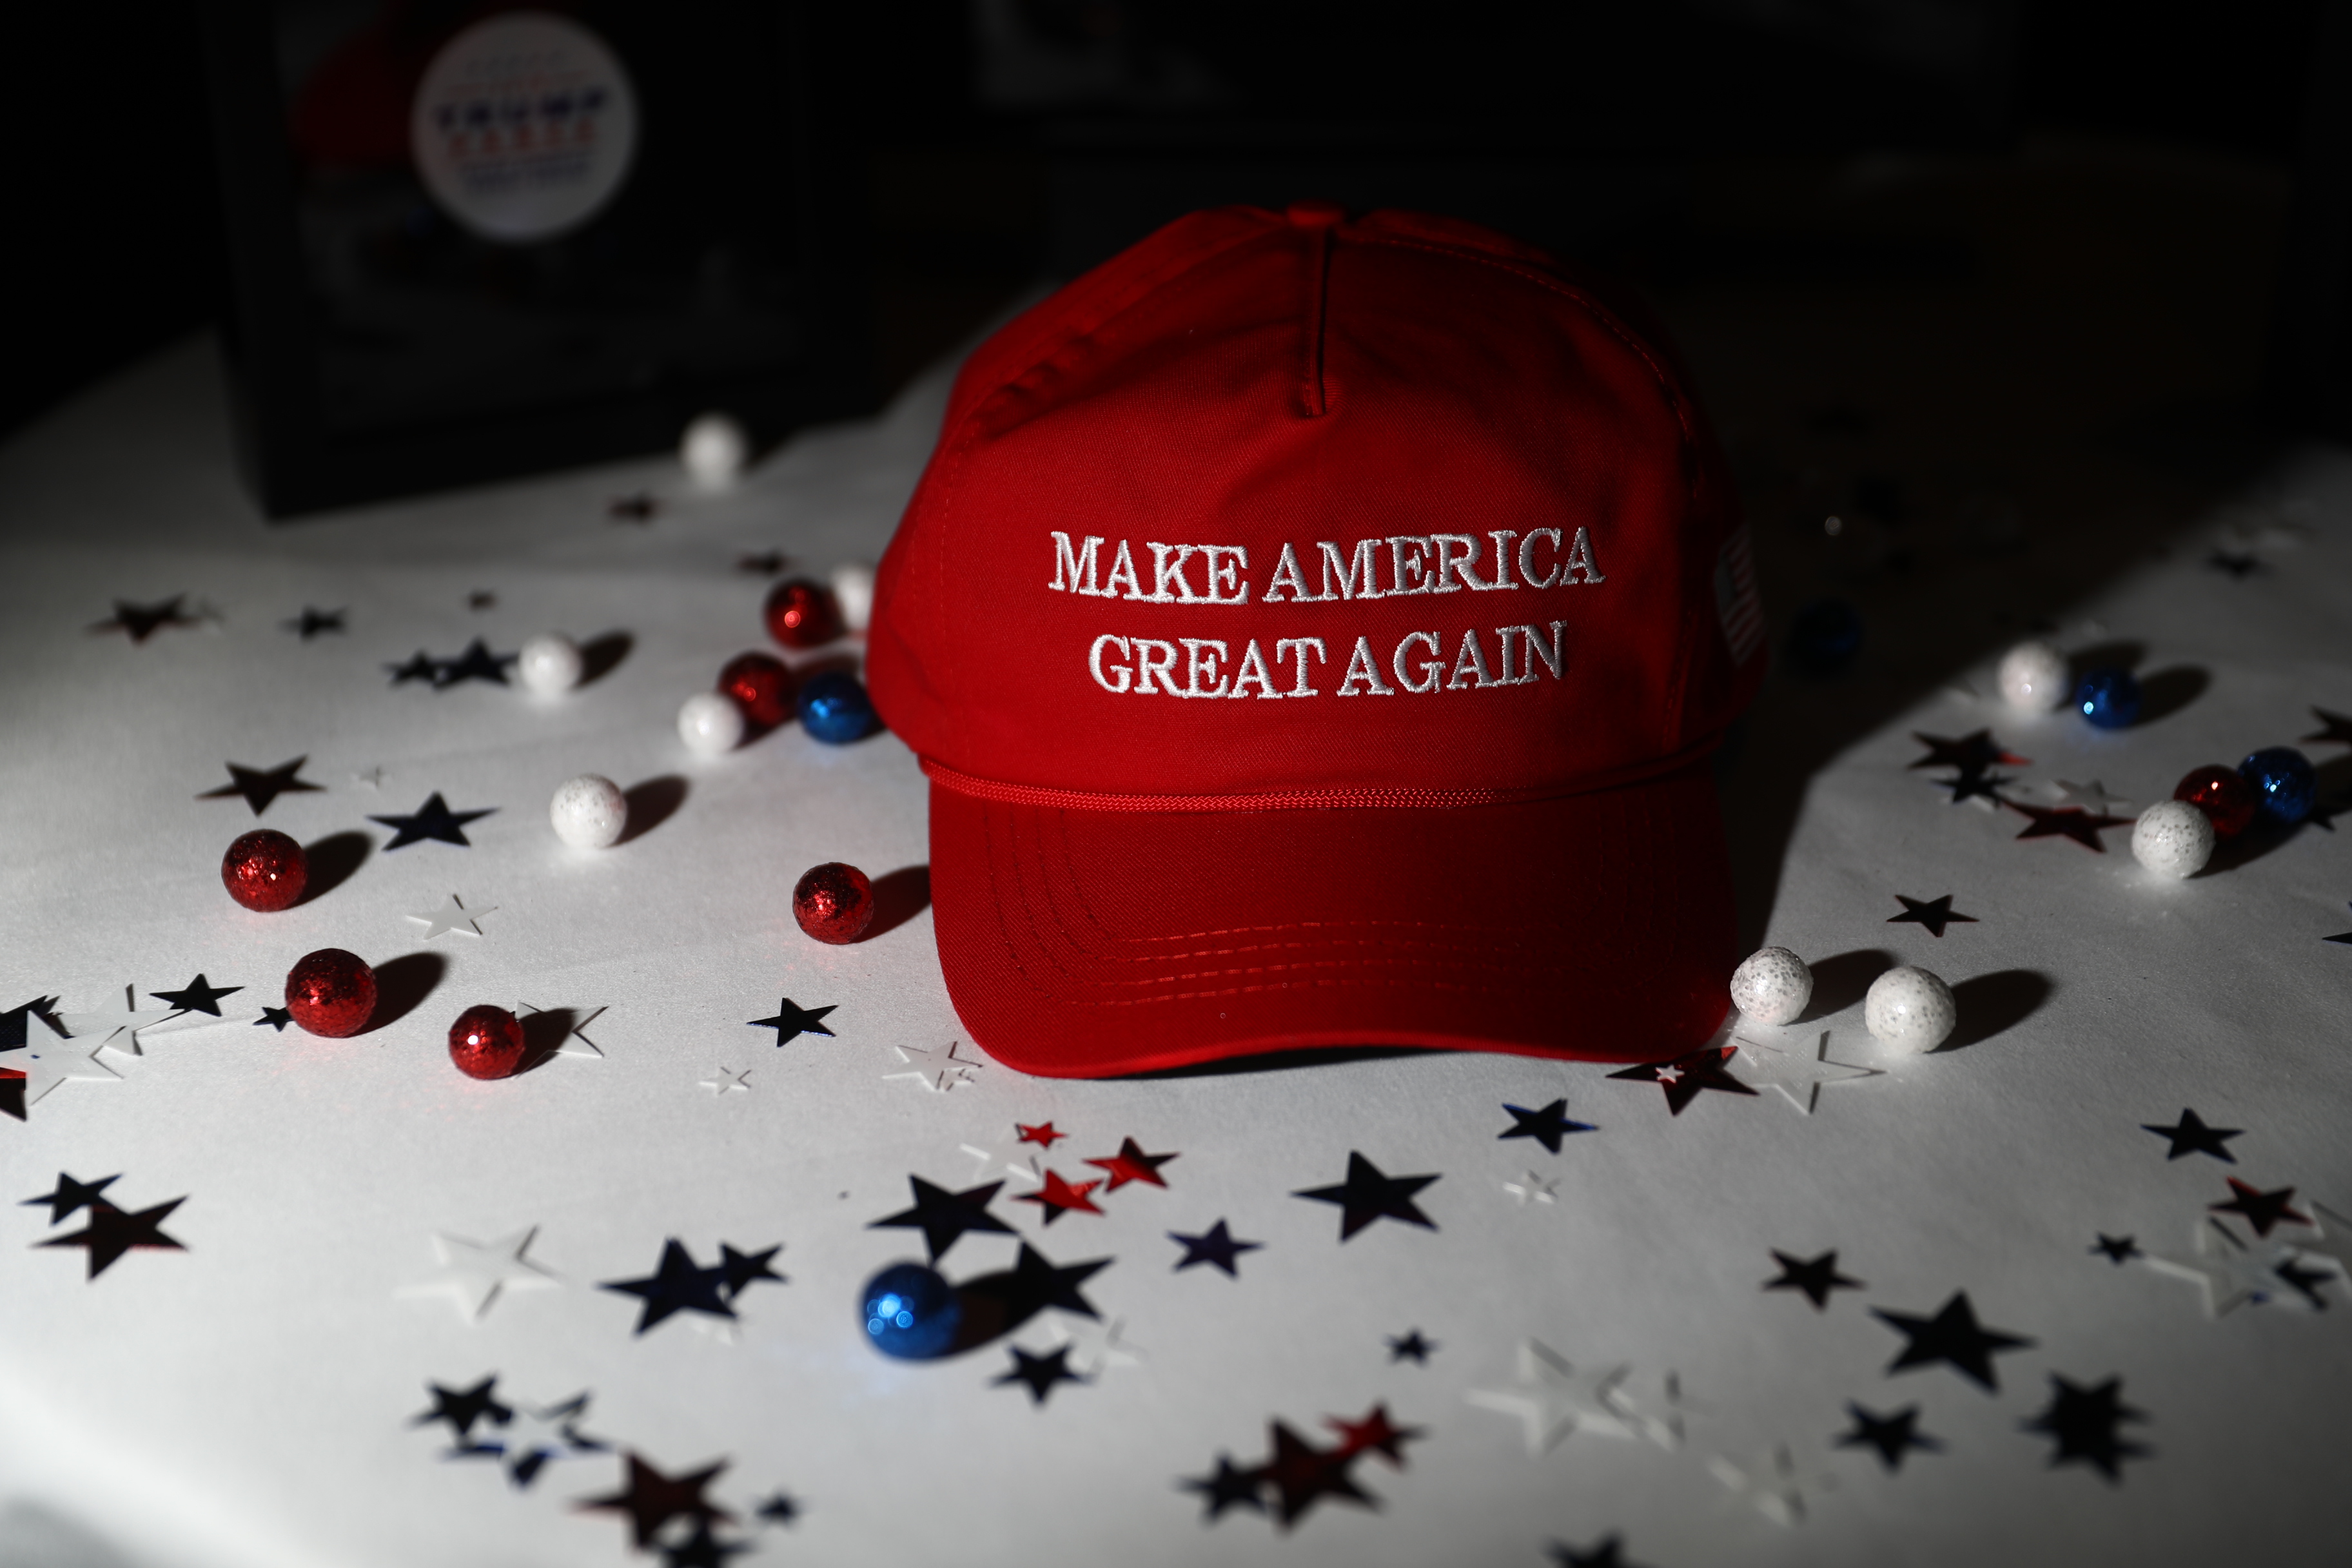 A "Make America Great Again" hat sits on a table ahead of an election night party for 2016 Republican Presidential Nominee Donald Trump at the Hilton Midtown hotel in New York on  Nov. 8, 2016.